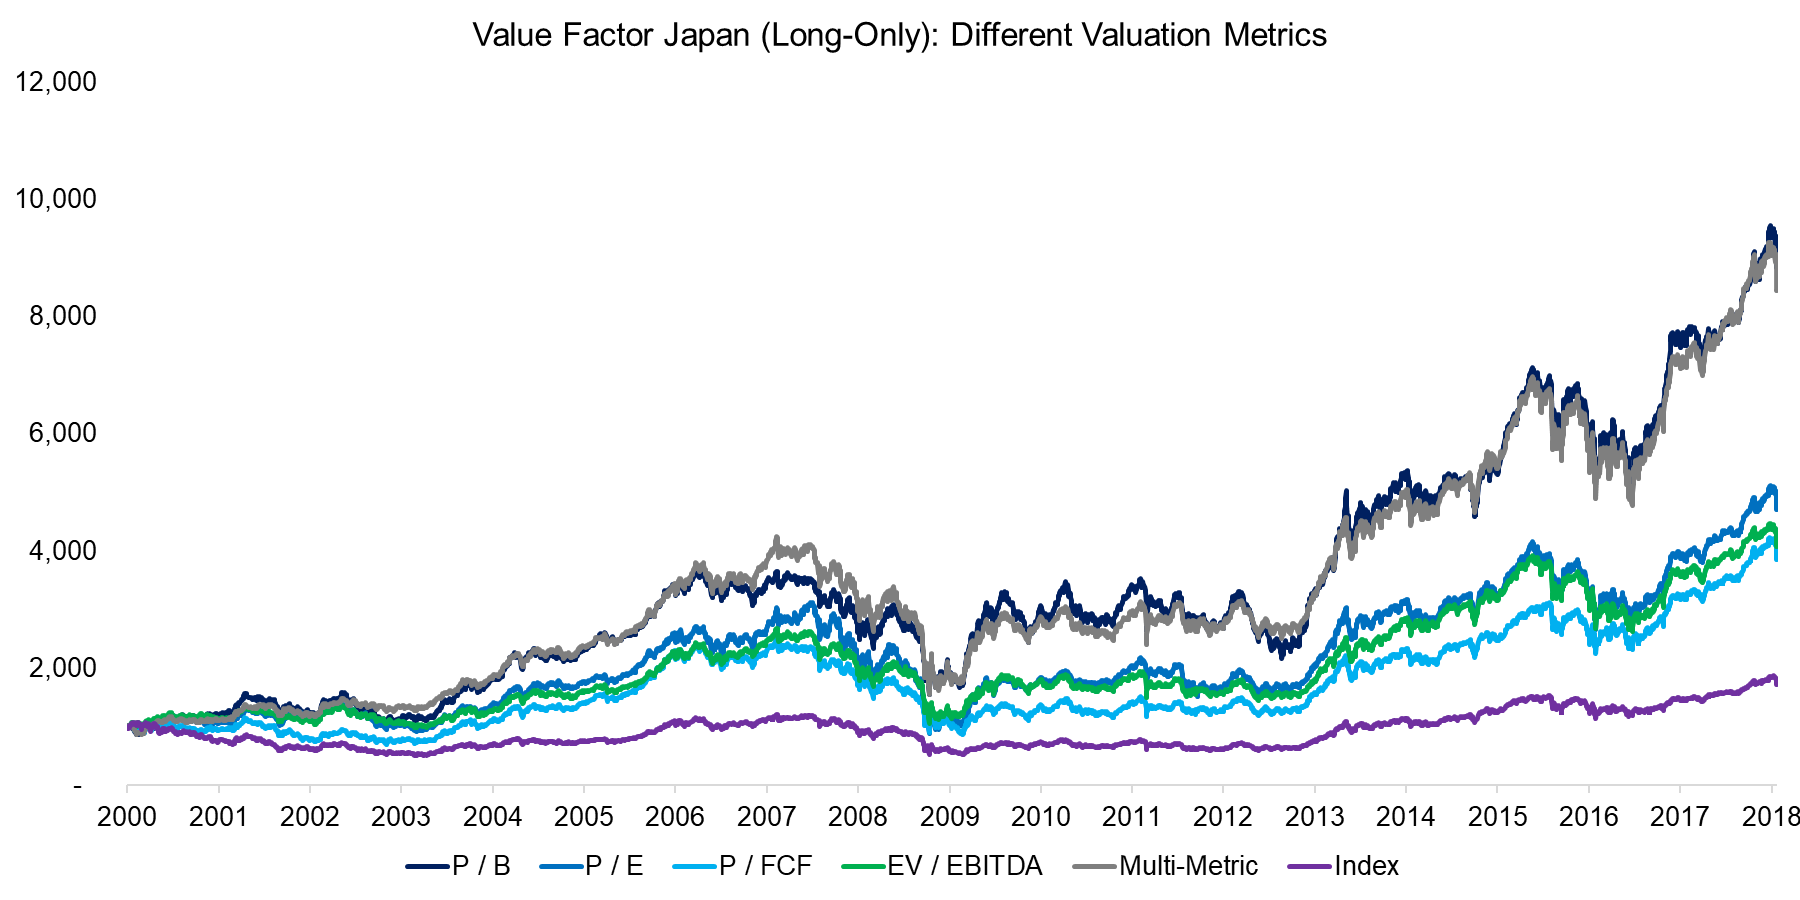 Value Factor Japan (Long-Only) Different Valuation Metrics